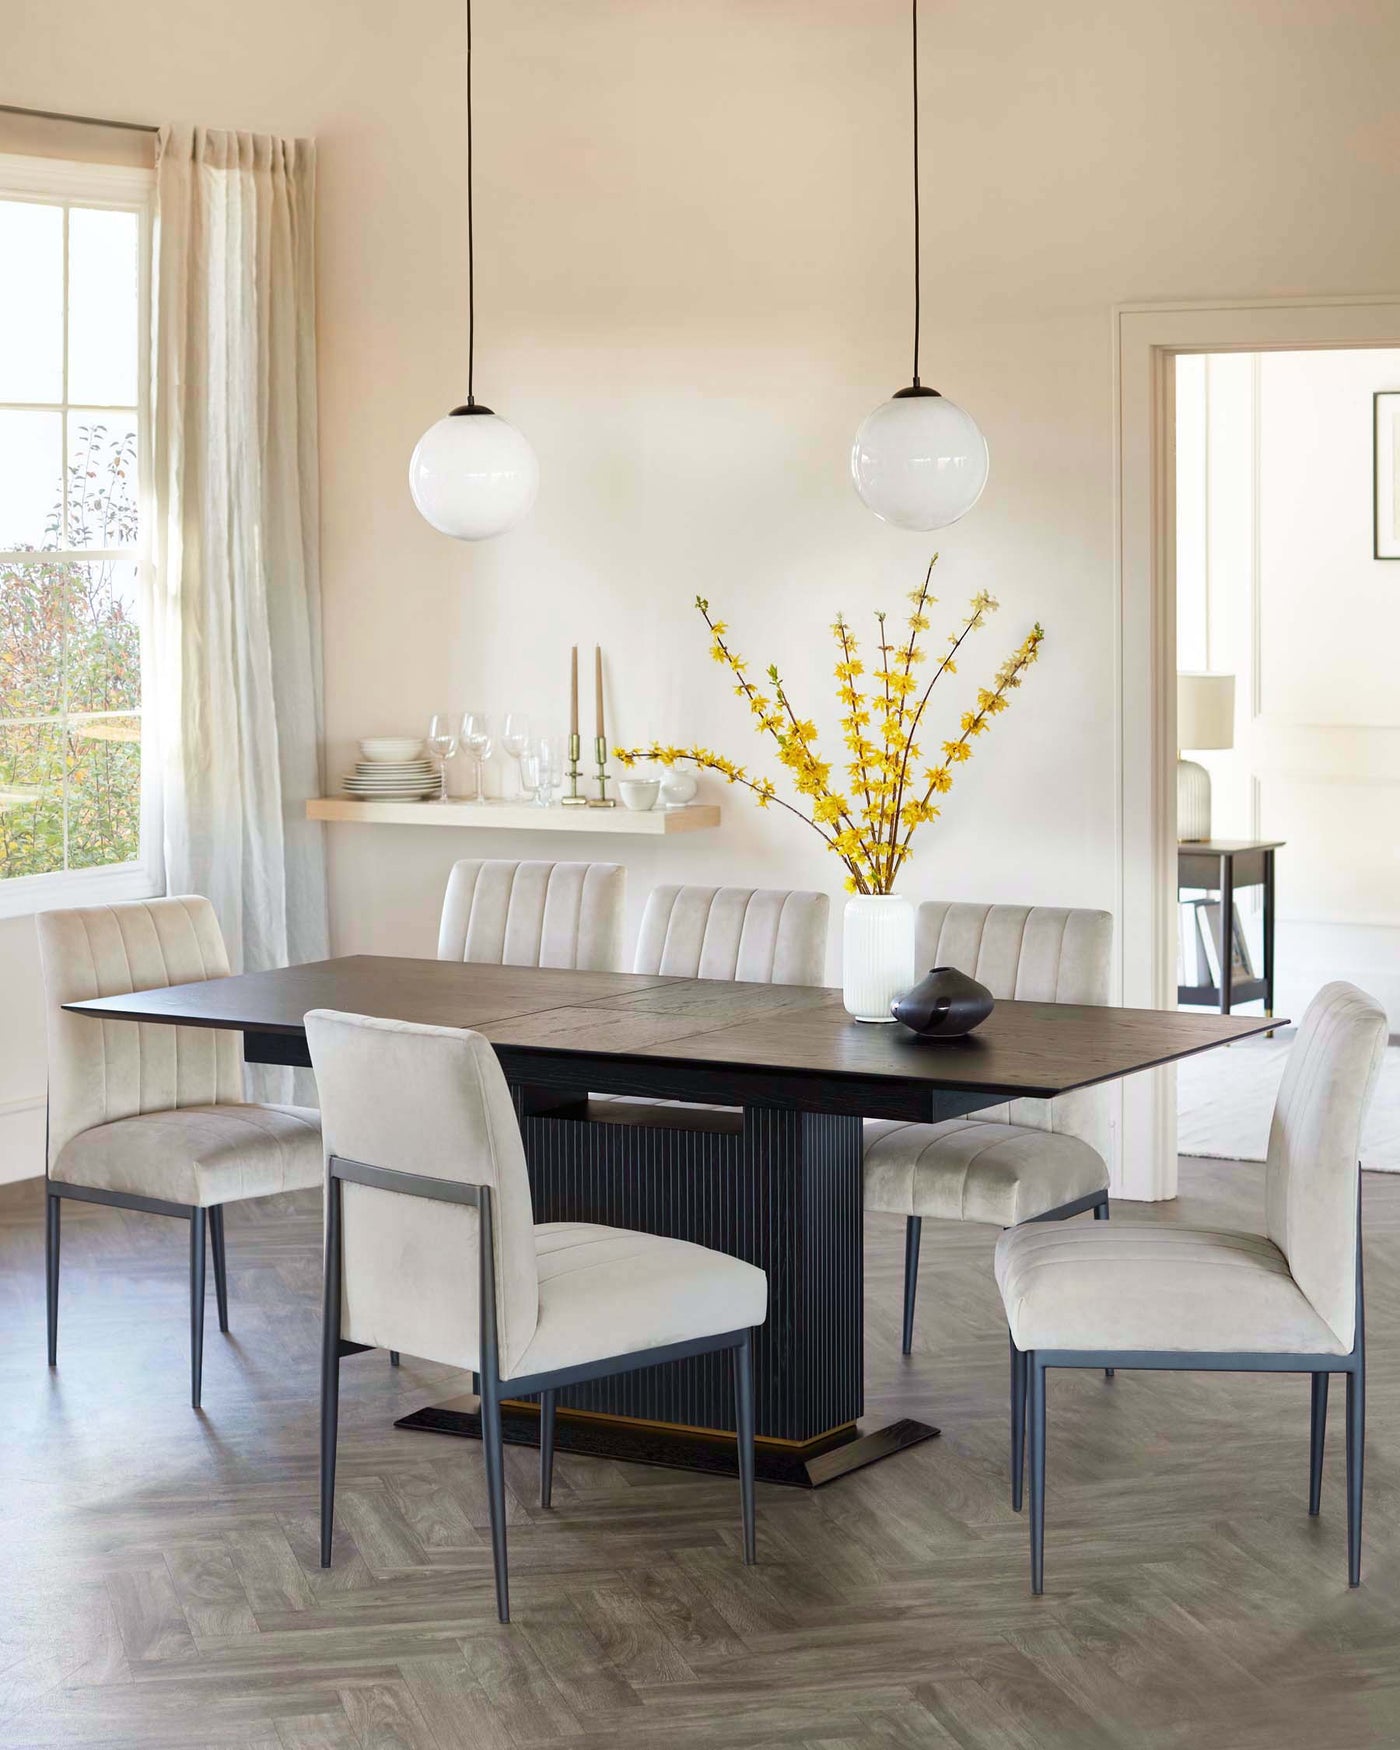 A modern dining room showcasing a dark wood rectangular dining table with a fluted design on the sides and an elegant metal base. Six upholstered dining chairs with soft fabric and slim metal legs are positioned around the table. The room is complemented by minimalist decor and two simple, round pendant lights overhead.